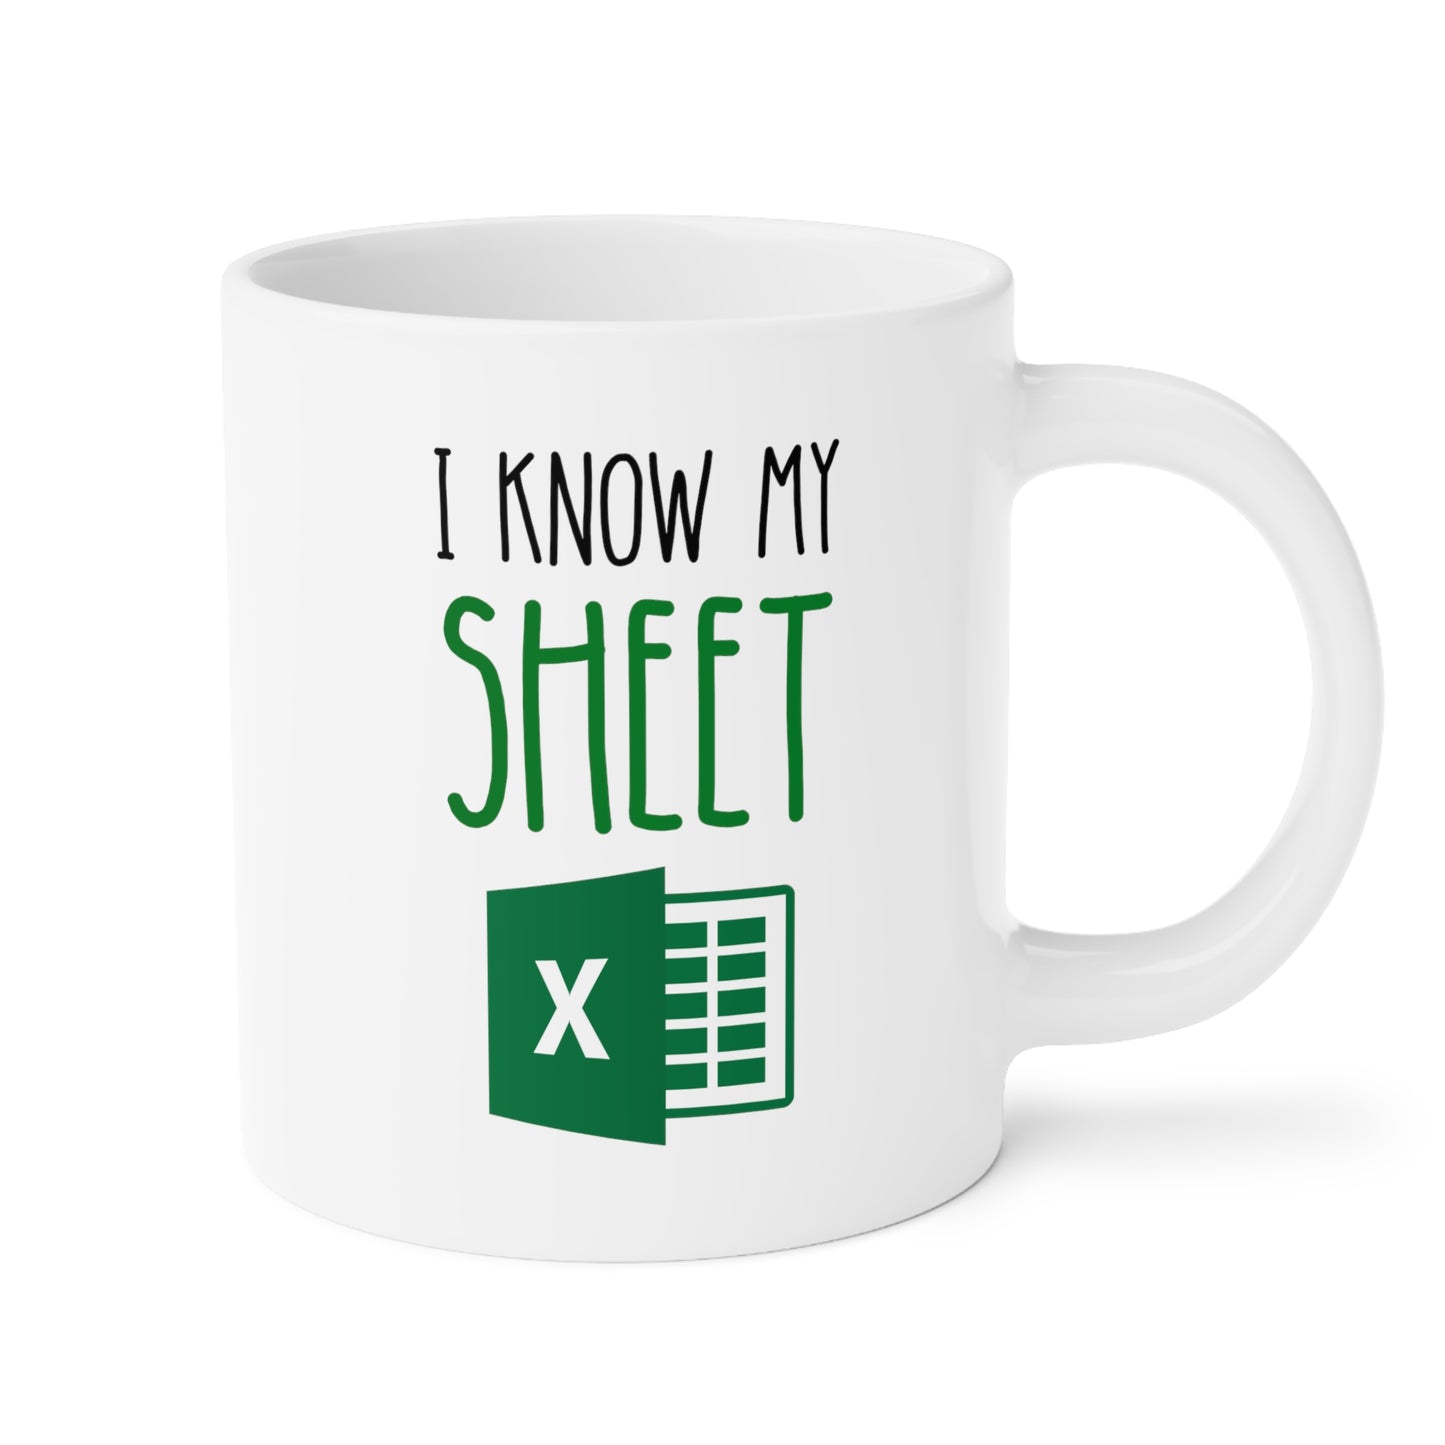 I Know My Sheet 20oz white funny large coffee mug gift for work colleague spreadsheet accountant office coworker excel waveywares wavey wares wavywares wavy wares